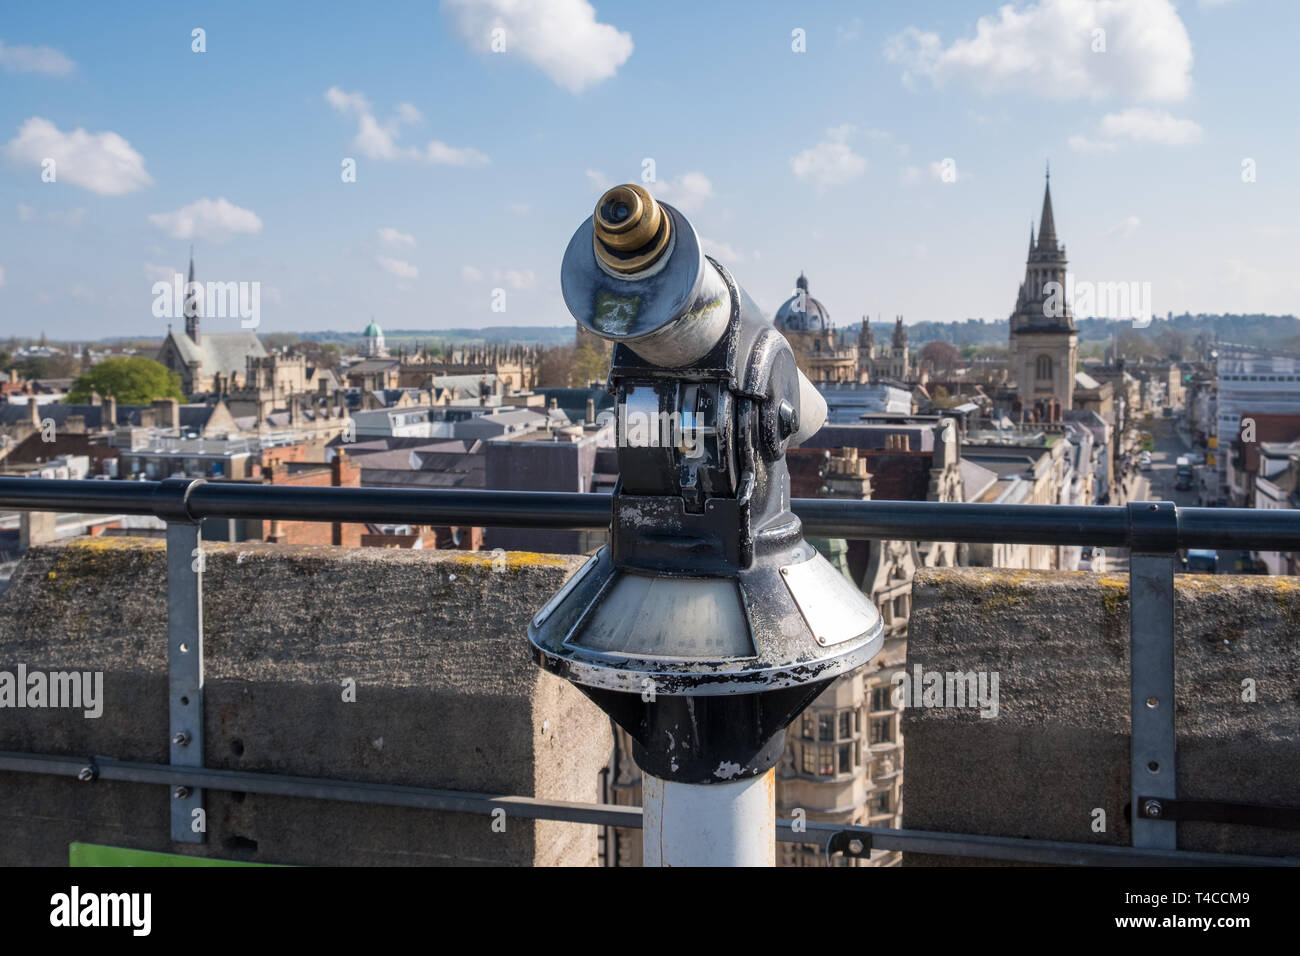 Coin operated telescope on the viewing platform on the rooftop of the 12th Century Carfax Tower in Oxford, UK Stock Photo